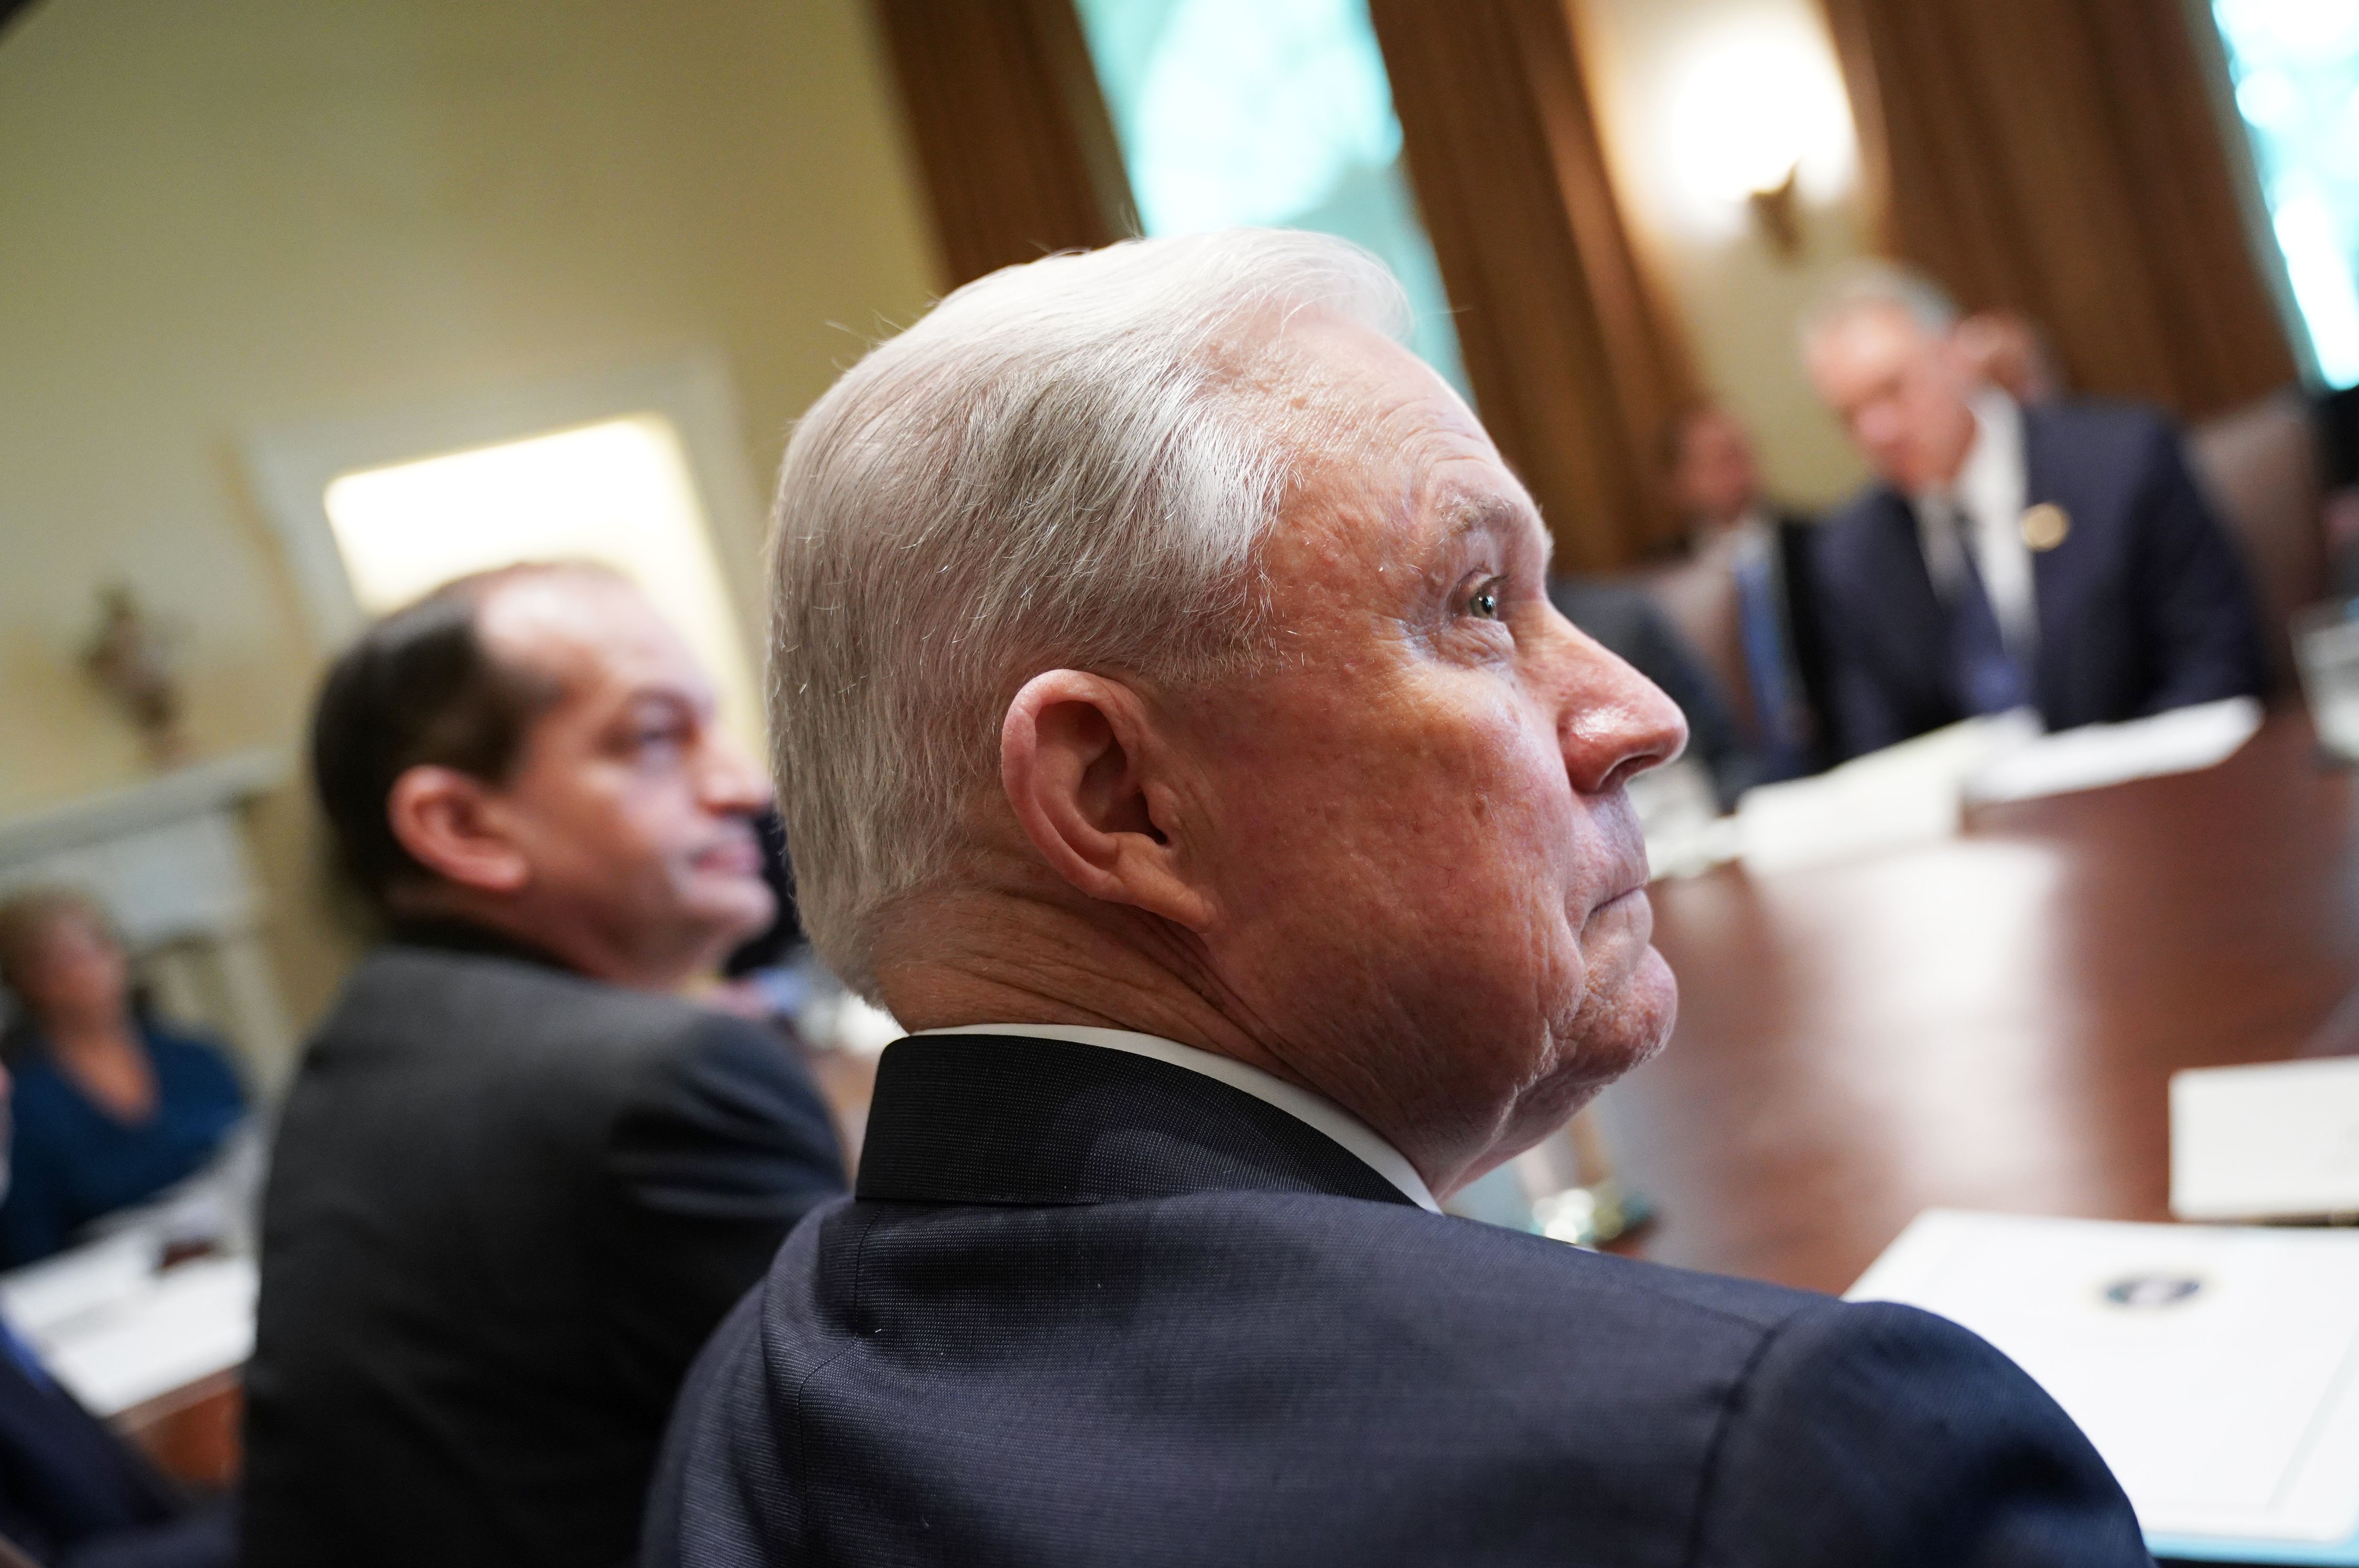 Jeff Sessions at a Cabinet meeting in Washington